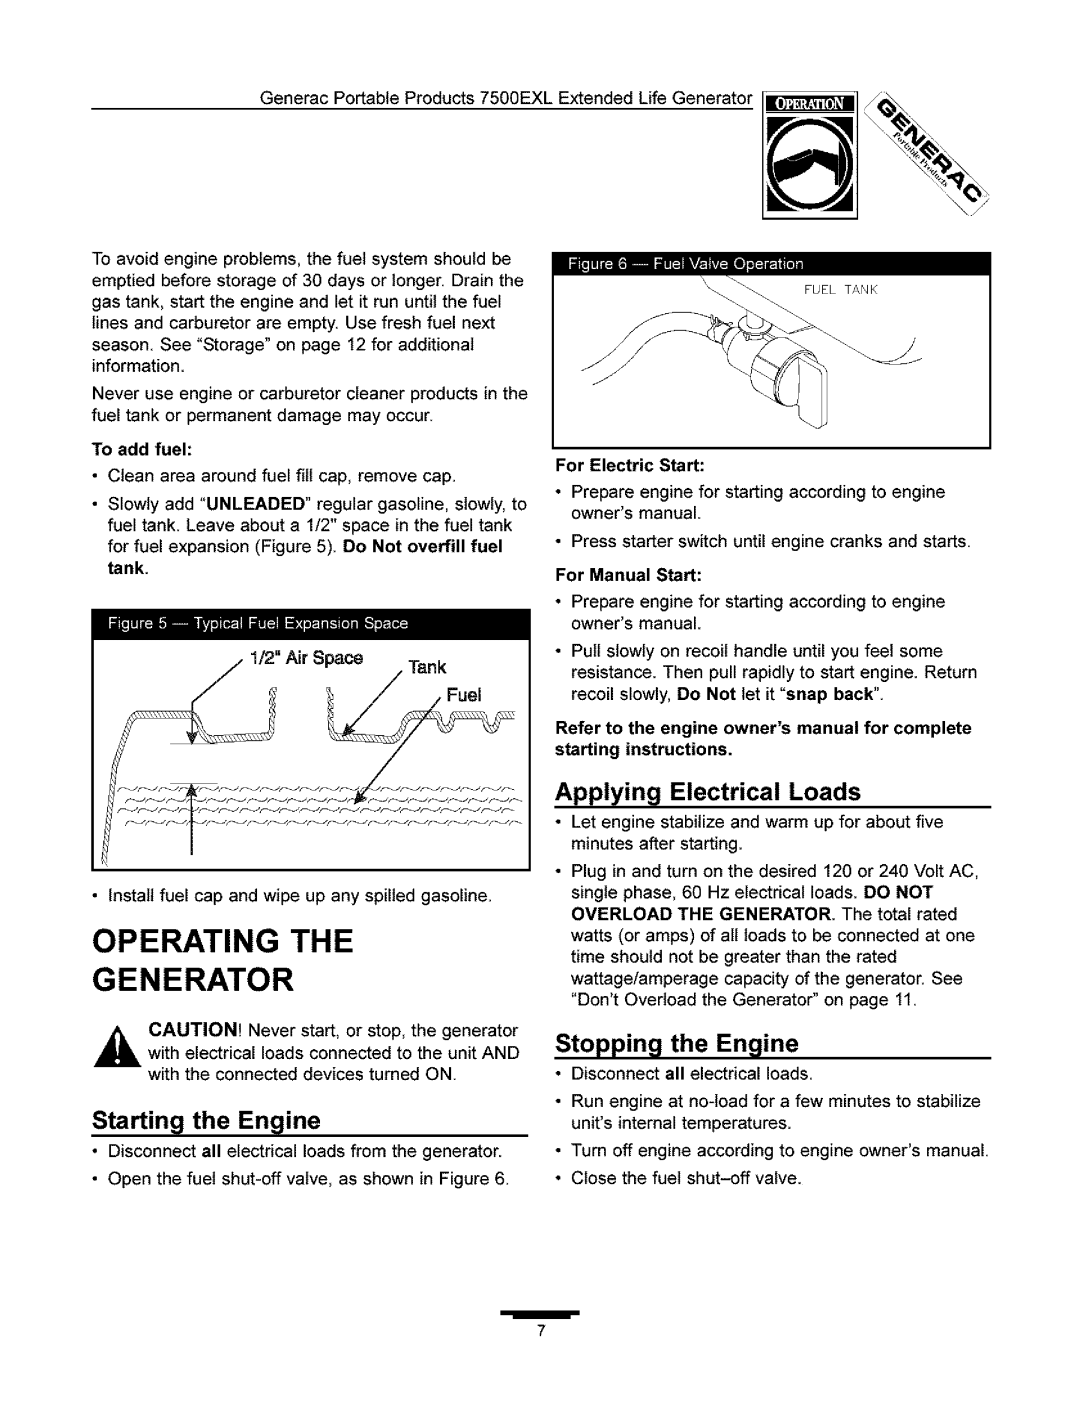 Generac 7500 owner manual Operating The Generator, Toavoidengineproblems,thefuelsystemshouldbe, Starting the Engine 